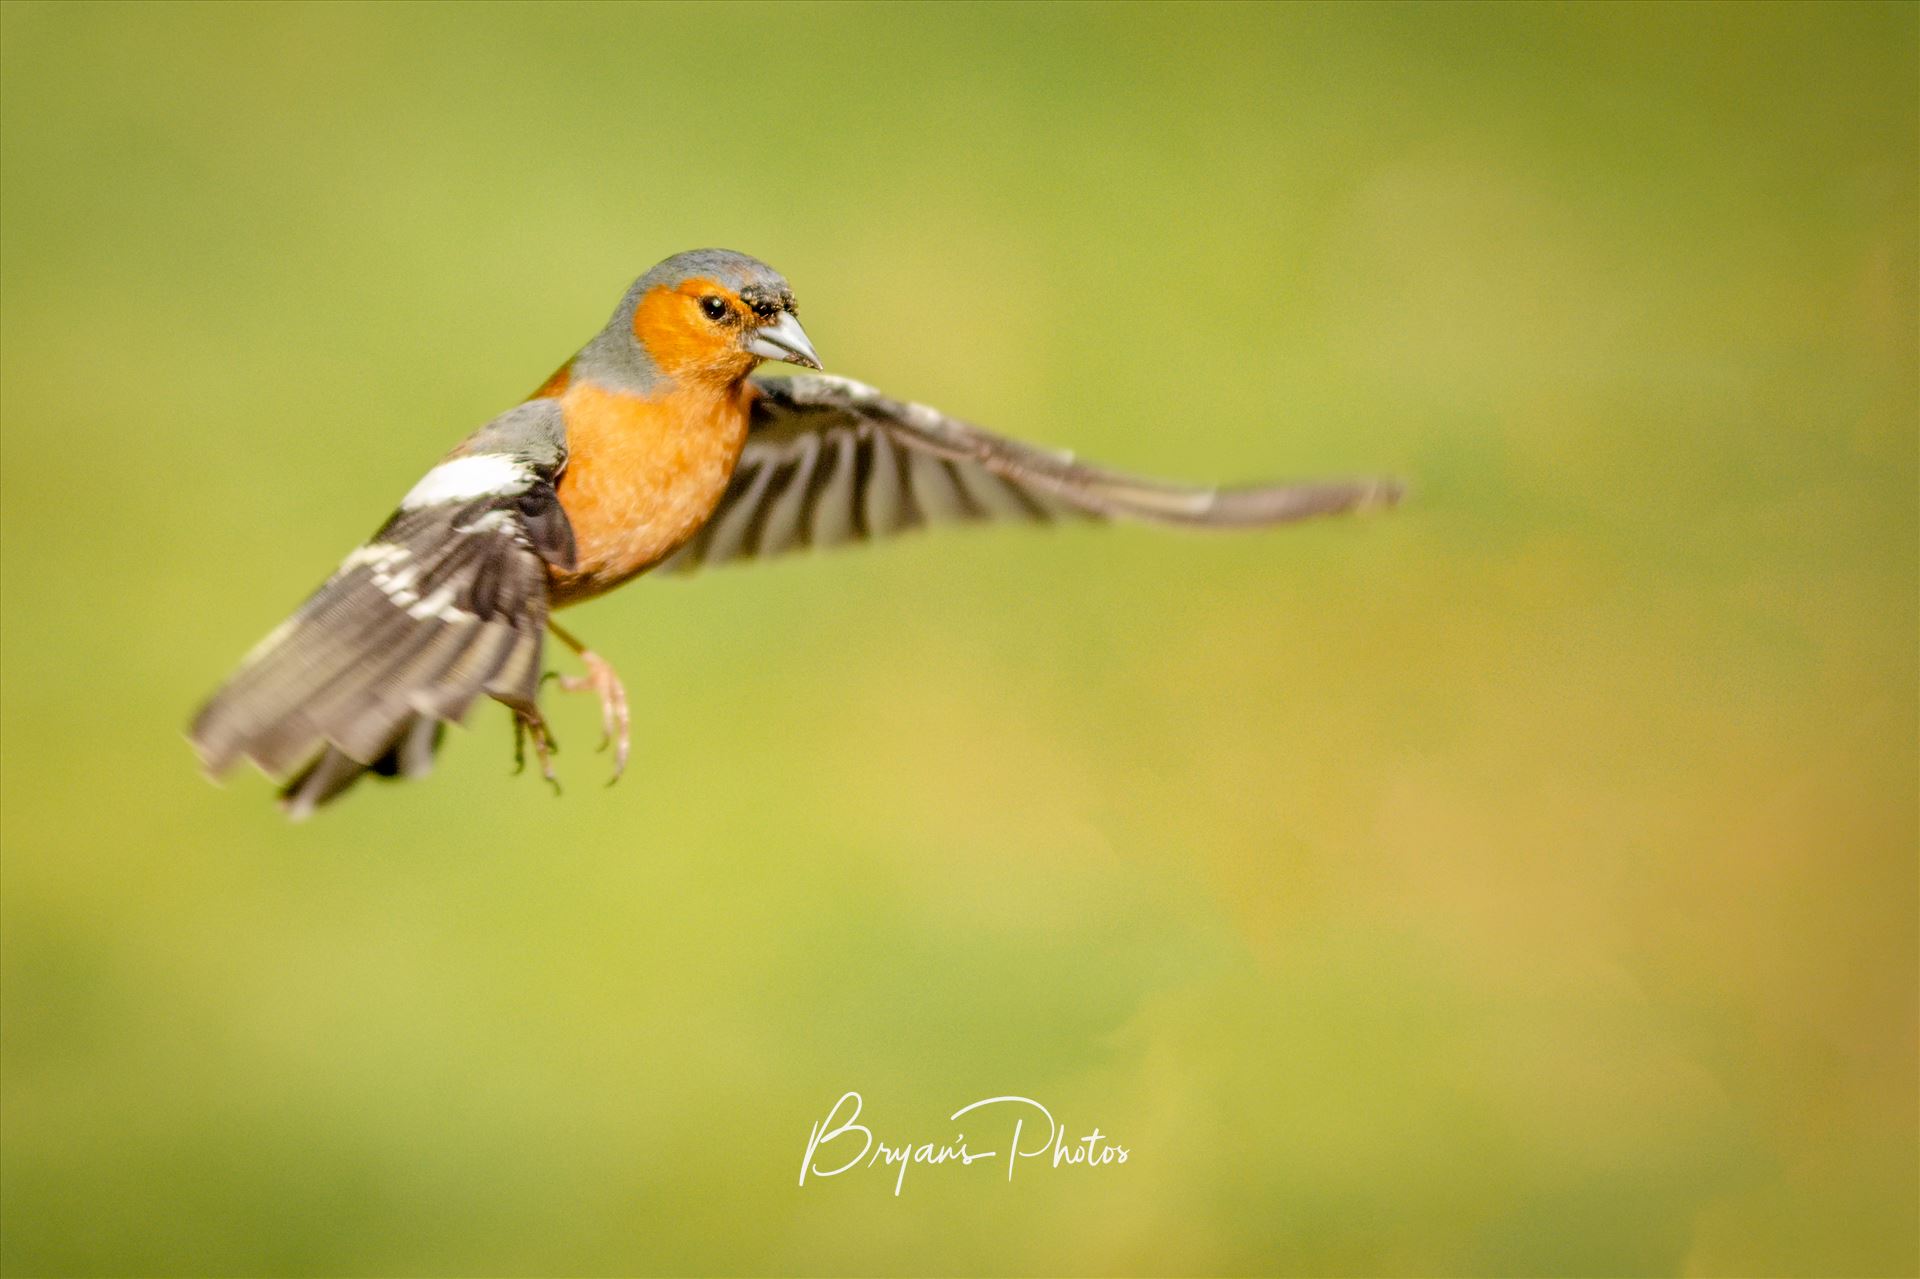 Male Chaffinch A photograph of a male Chaffinch taken mid flight. by Bryans Photos